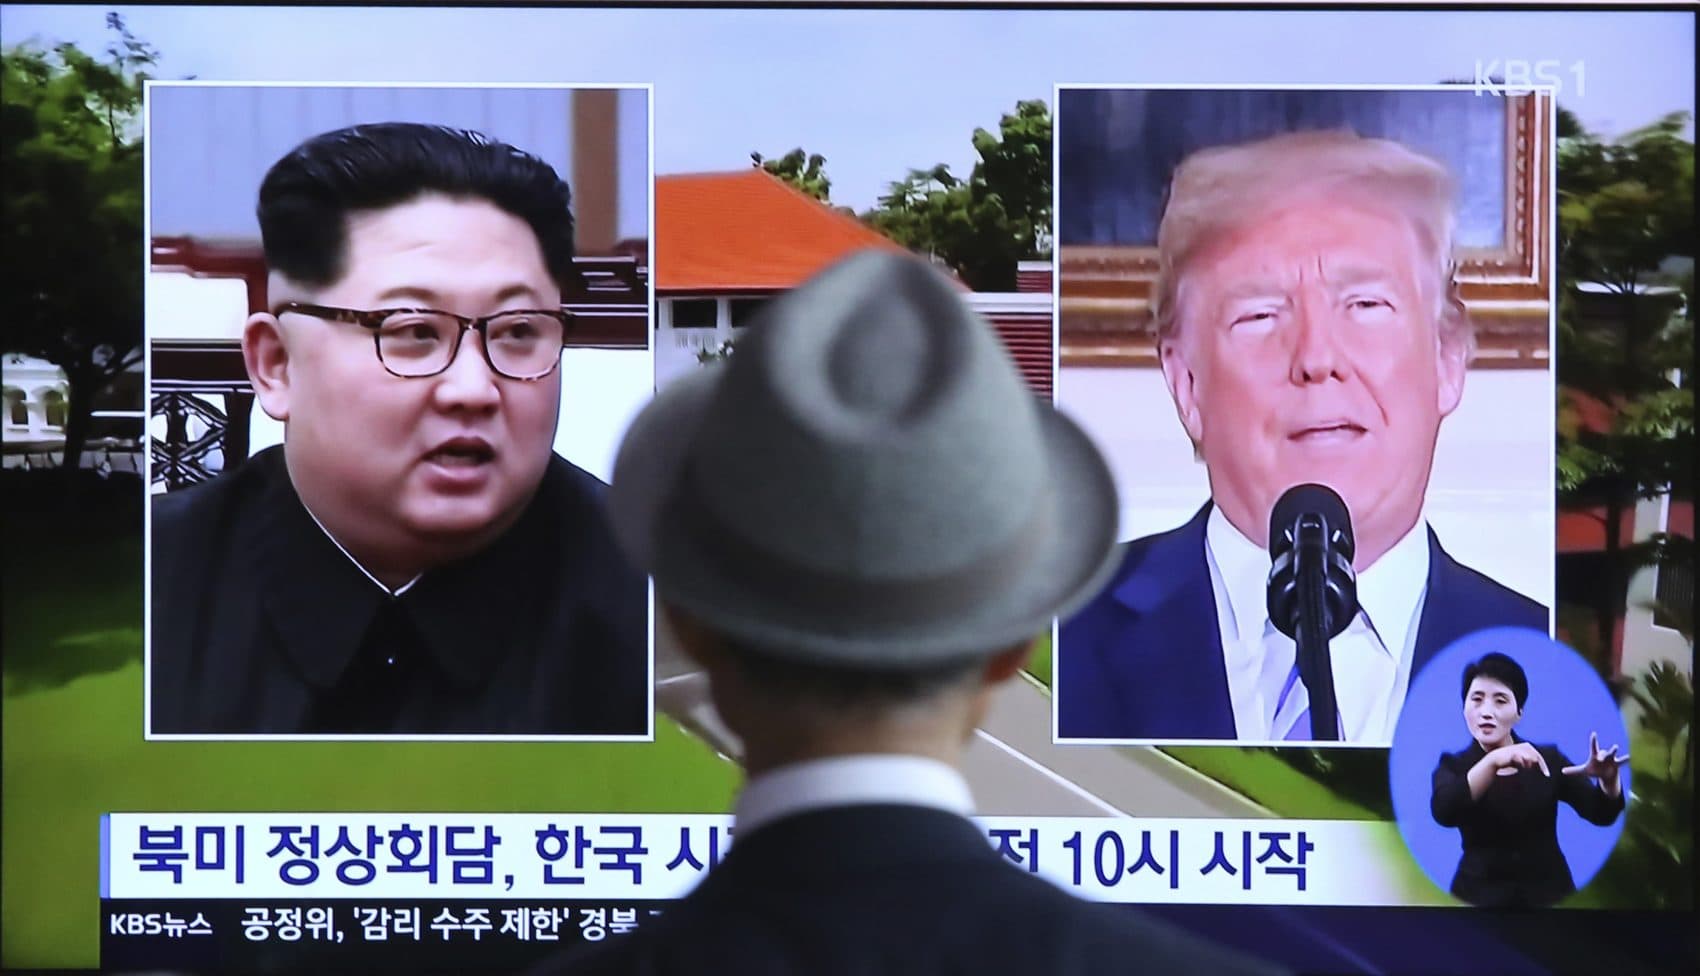 A man watches a TV screen showing file footage of U.S. President Donald Trump, right, and North Korean leader Kim Jong Un during a news program at the Seoul Railway Station in Seoul, South Korea, Monday, June 11, 2018. Final preparations are underway in Singapore for Tuesday's historic summit between President Trump and North Korean leader Kim, including a plan for the leaders to kick things off by meeting with only their translators present, a U.S. official said. The signs read: &quot;Summit between the United States and North Korea.&quot; (Ahn Young-joon/AP)